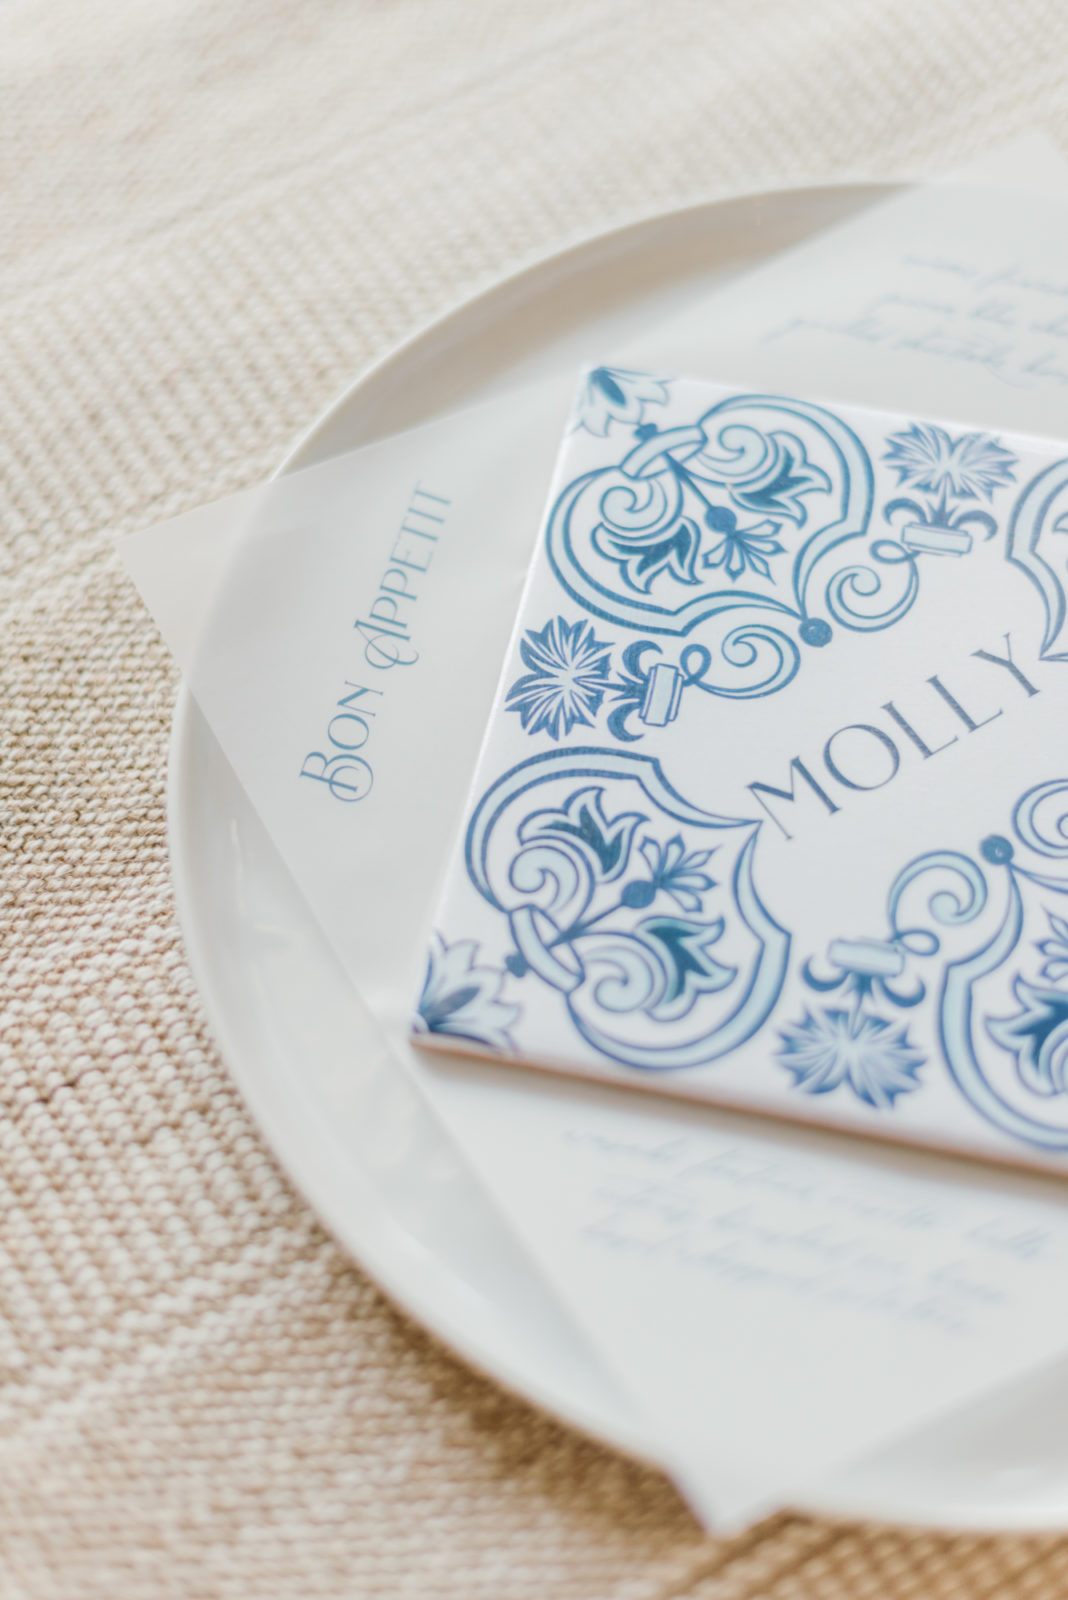 Azure tiles as seating cards, Portugal inspired wedding